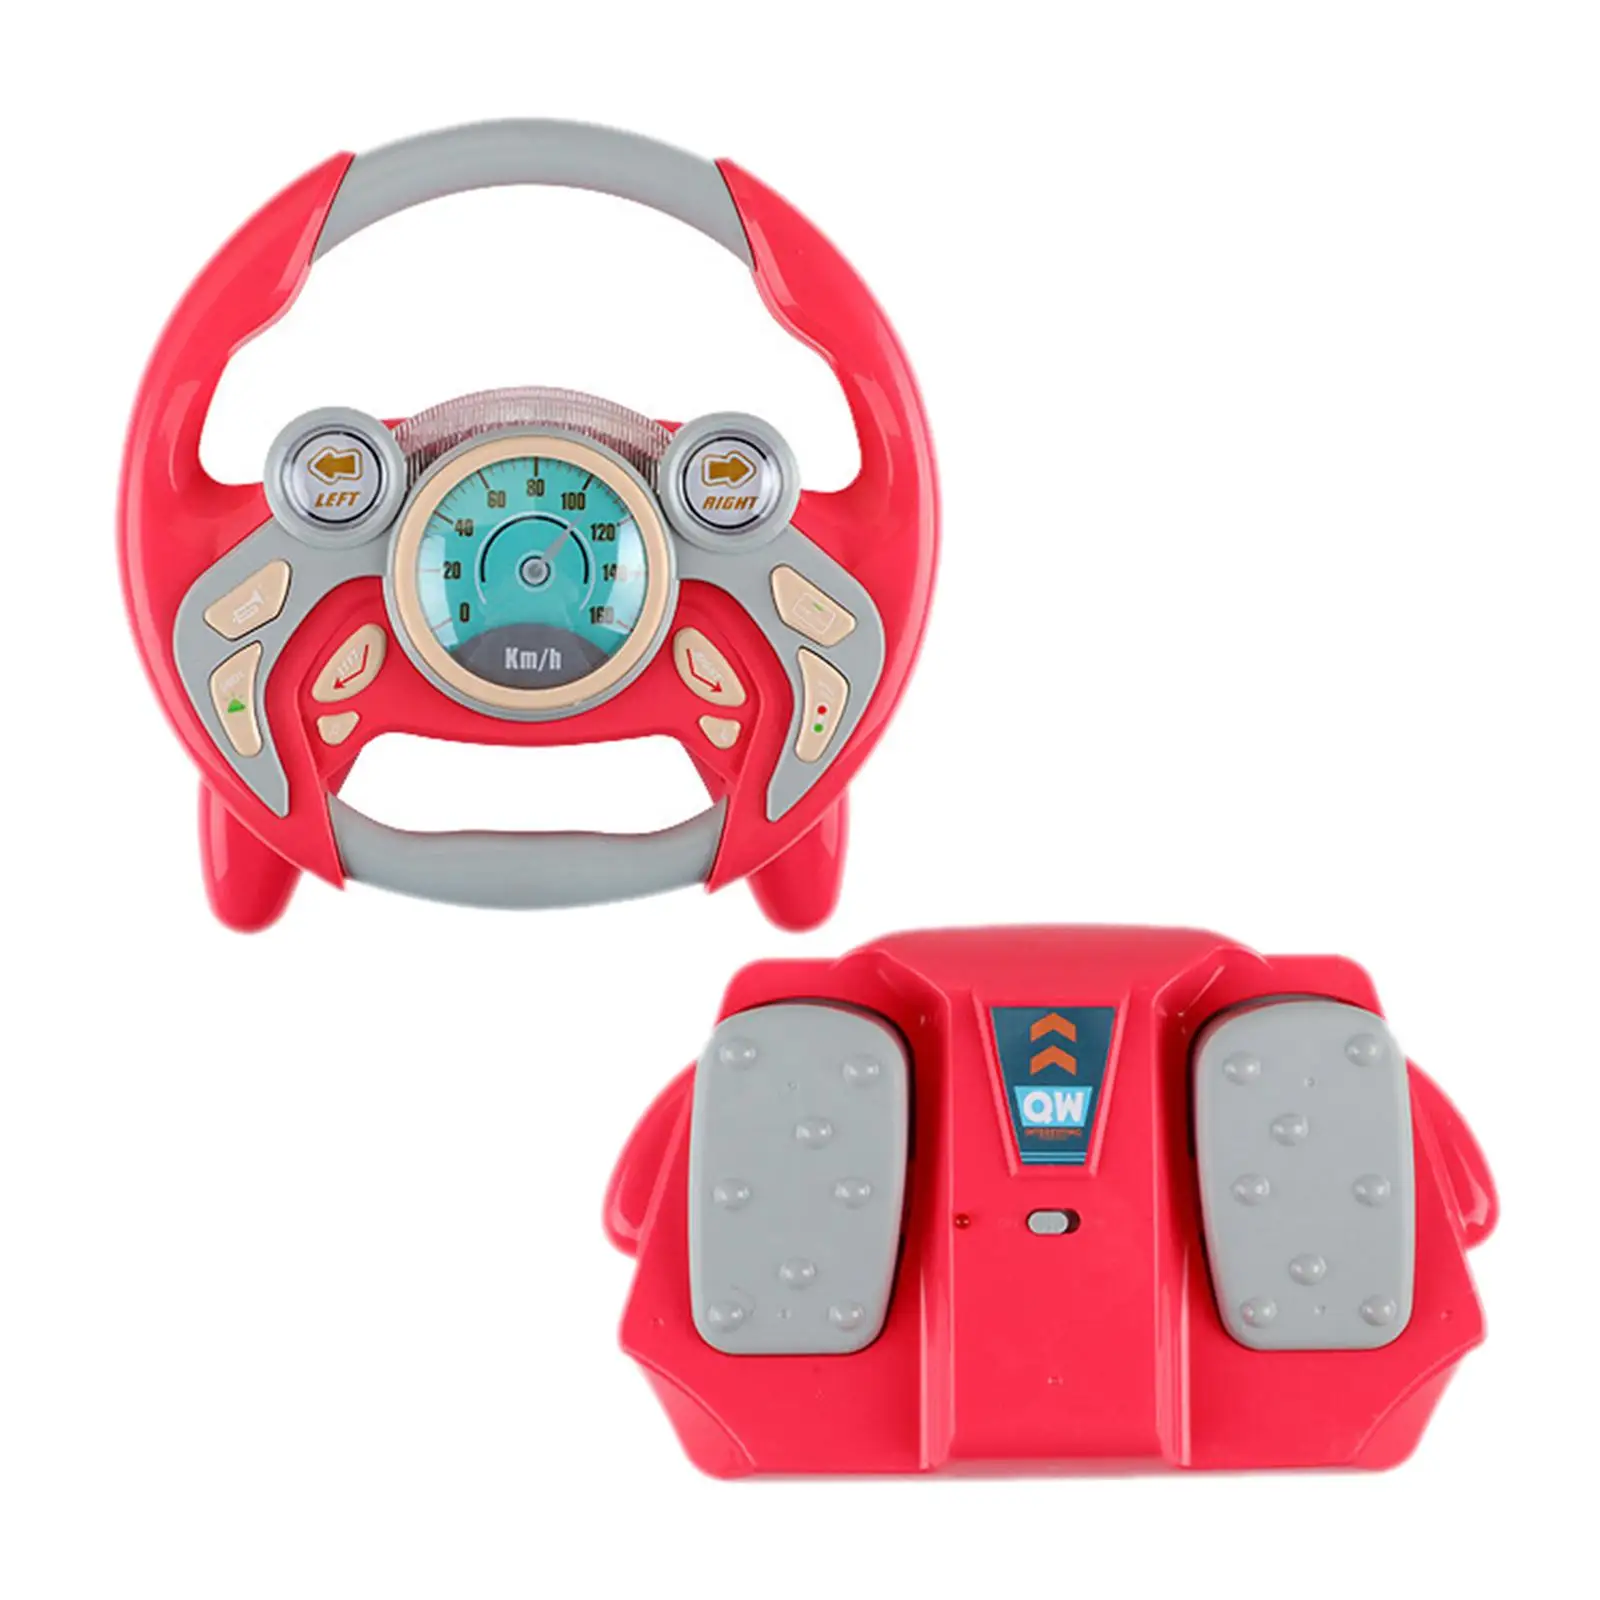 Simulated Steering Wheel for Kids Children Car Toy Gift Interactive Toys